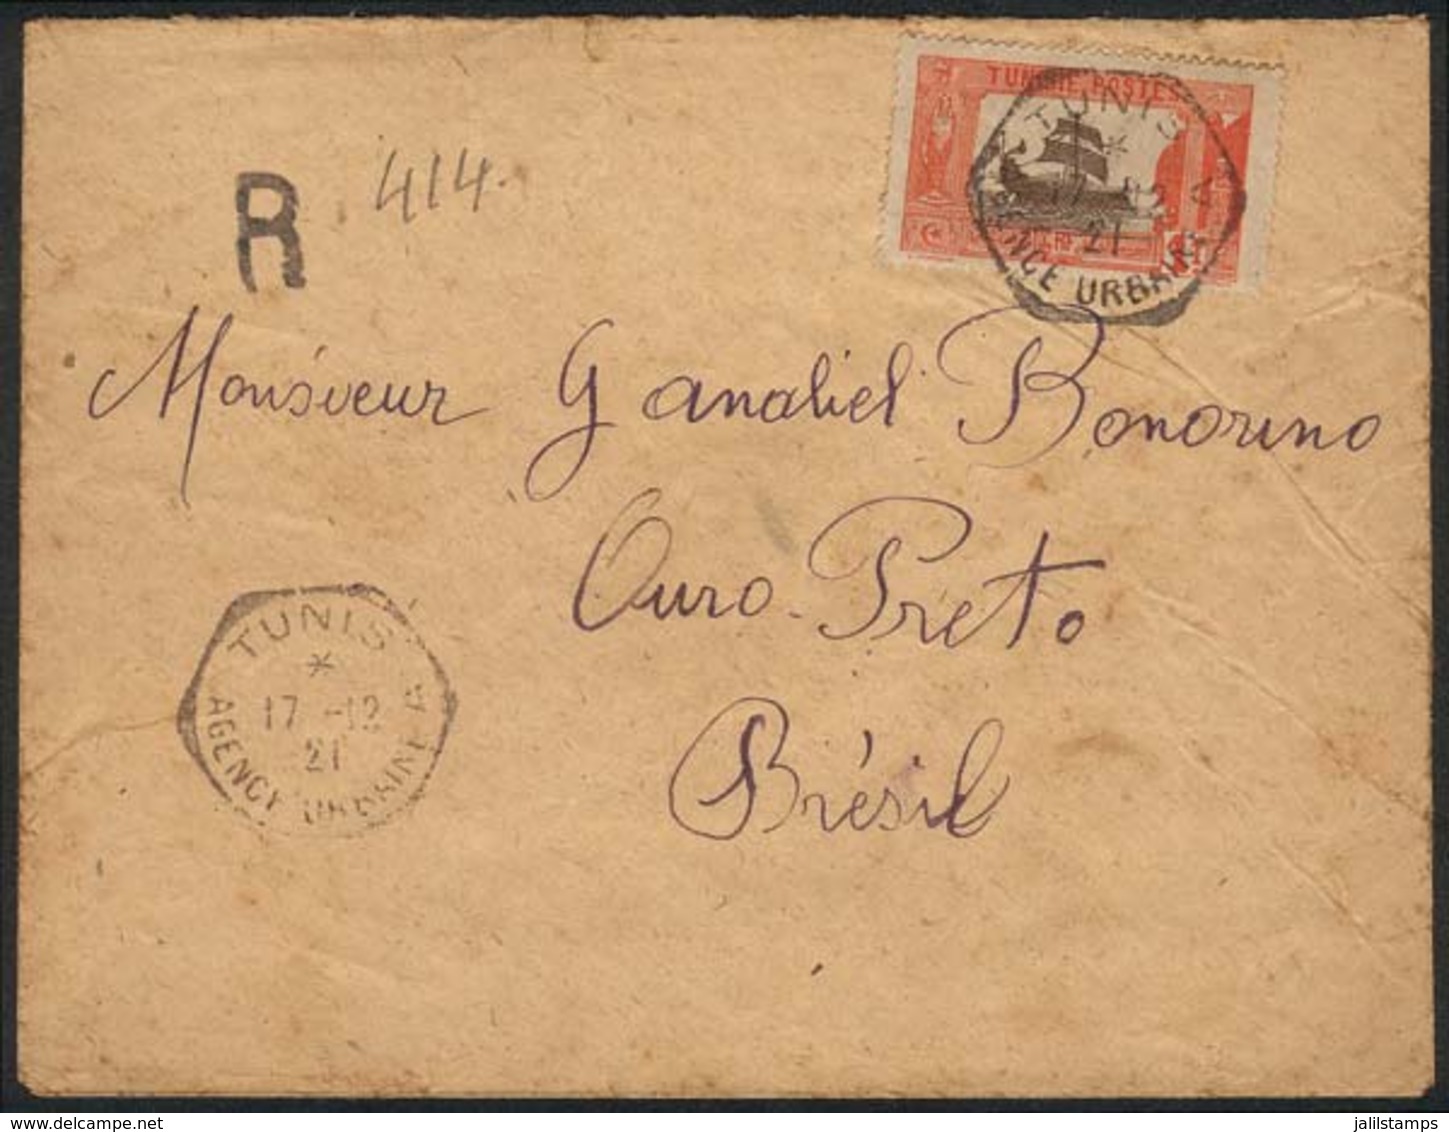 TUNISIA: Registered Cover Sent From "Tunis - Agence Urbane A" To Brazil On 17/DE/1921, Franked With 1Fr. (Sc.52) Alone,  - Tunisia